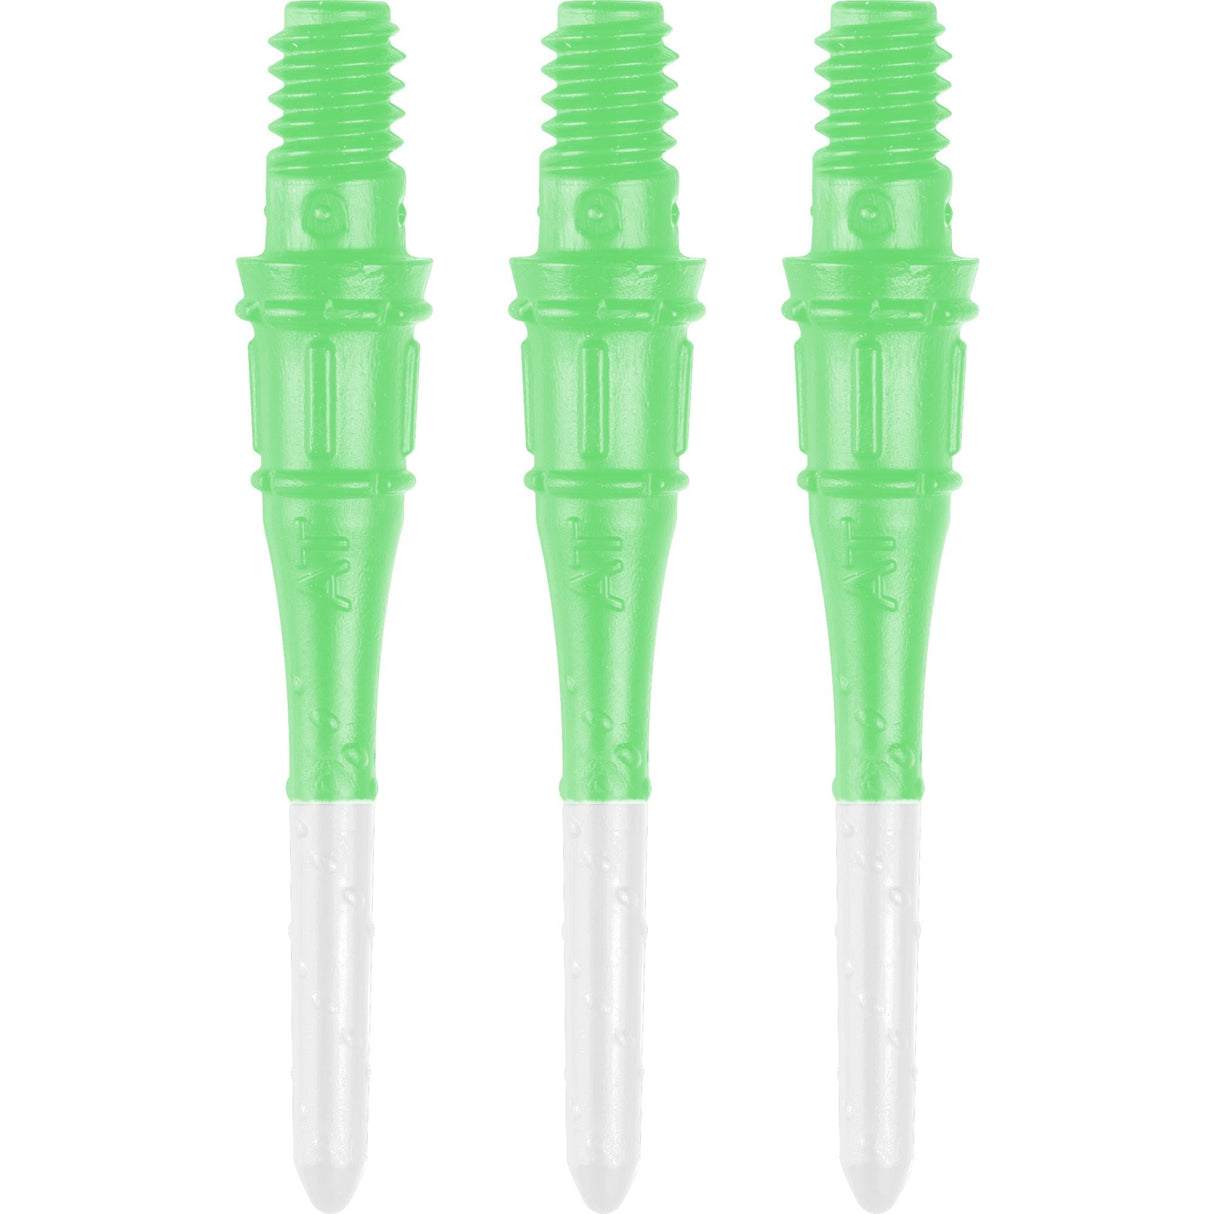 L-Style Premium Lippoints Two Tone - Spare Tips - Lip Points - 2ba - Pack 30 Green